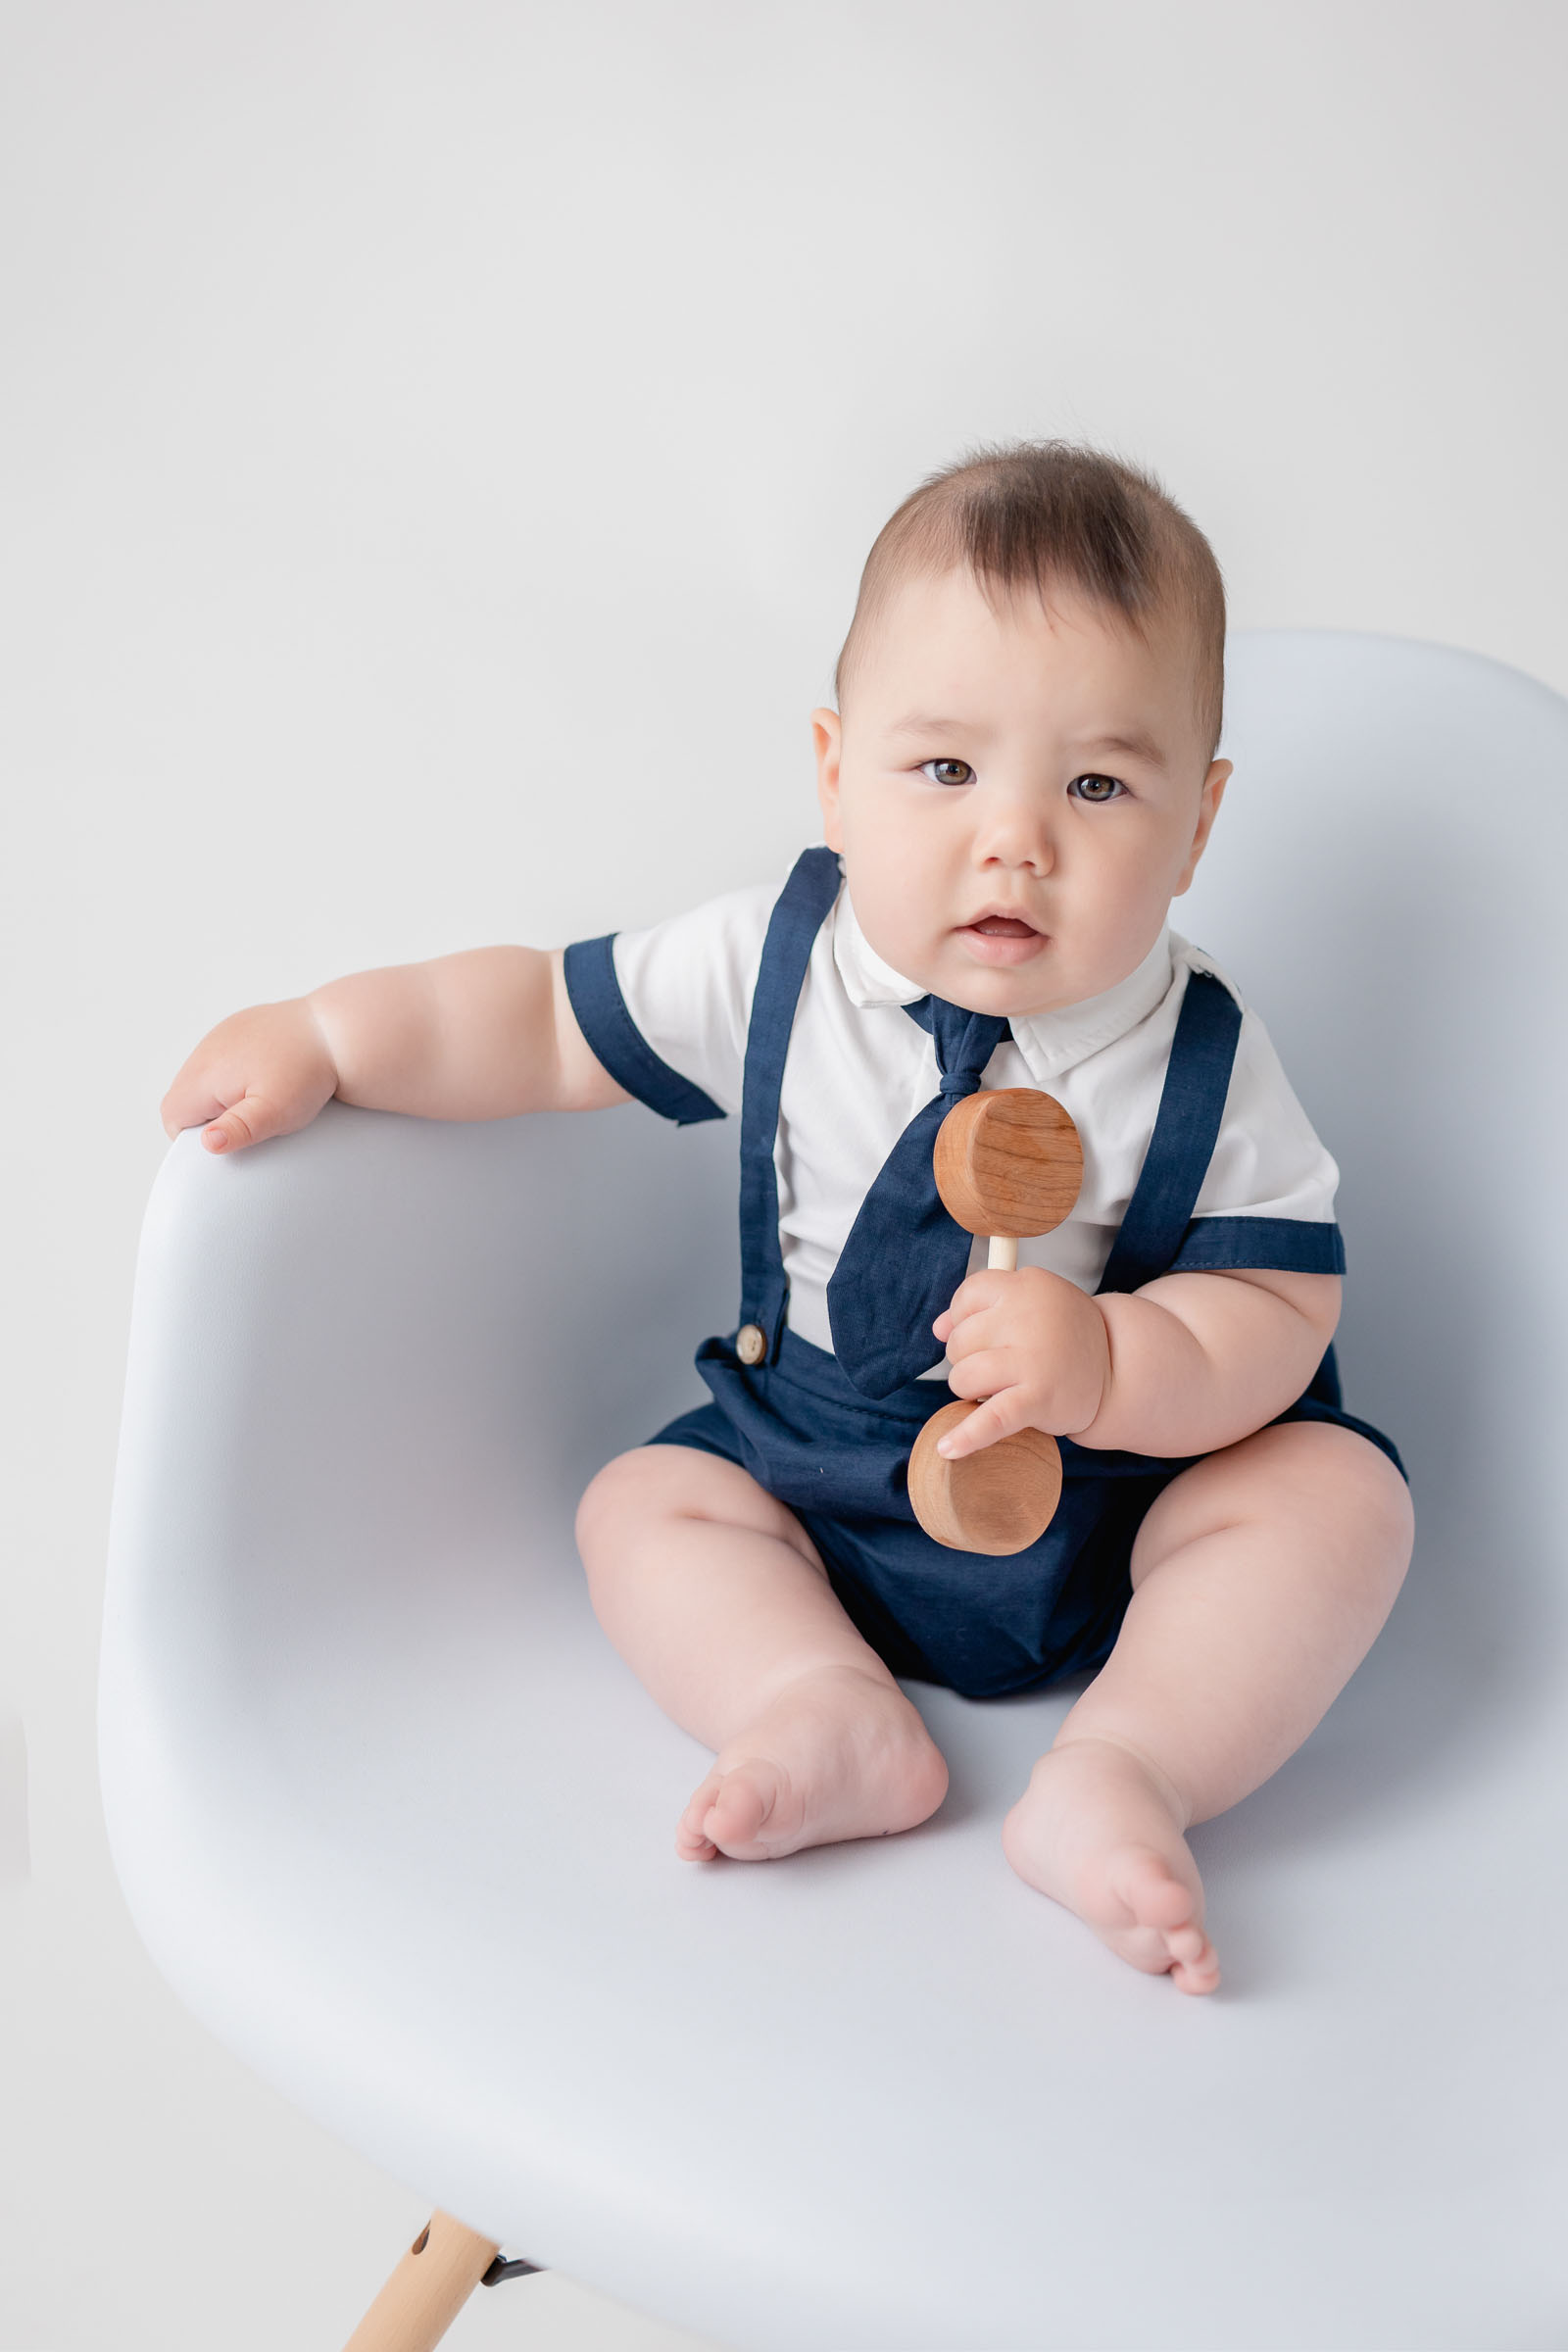 Chunky little baby boy sitting on a white chair for his 6 month sitter photoshoot